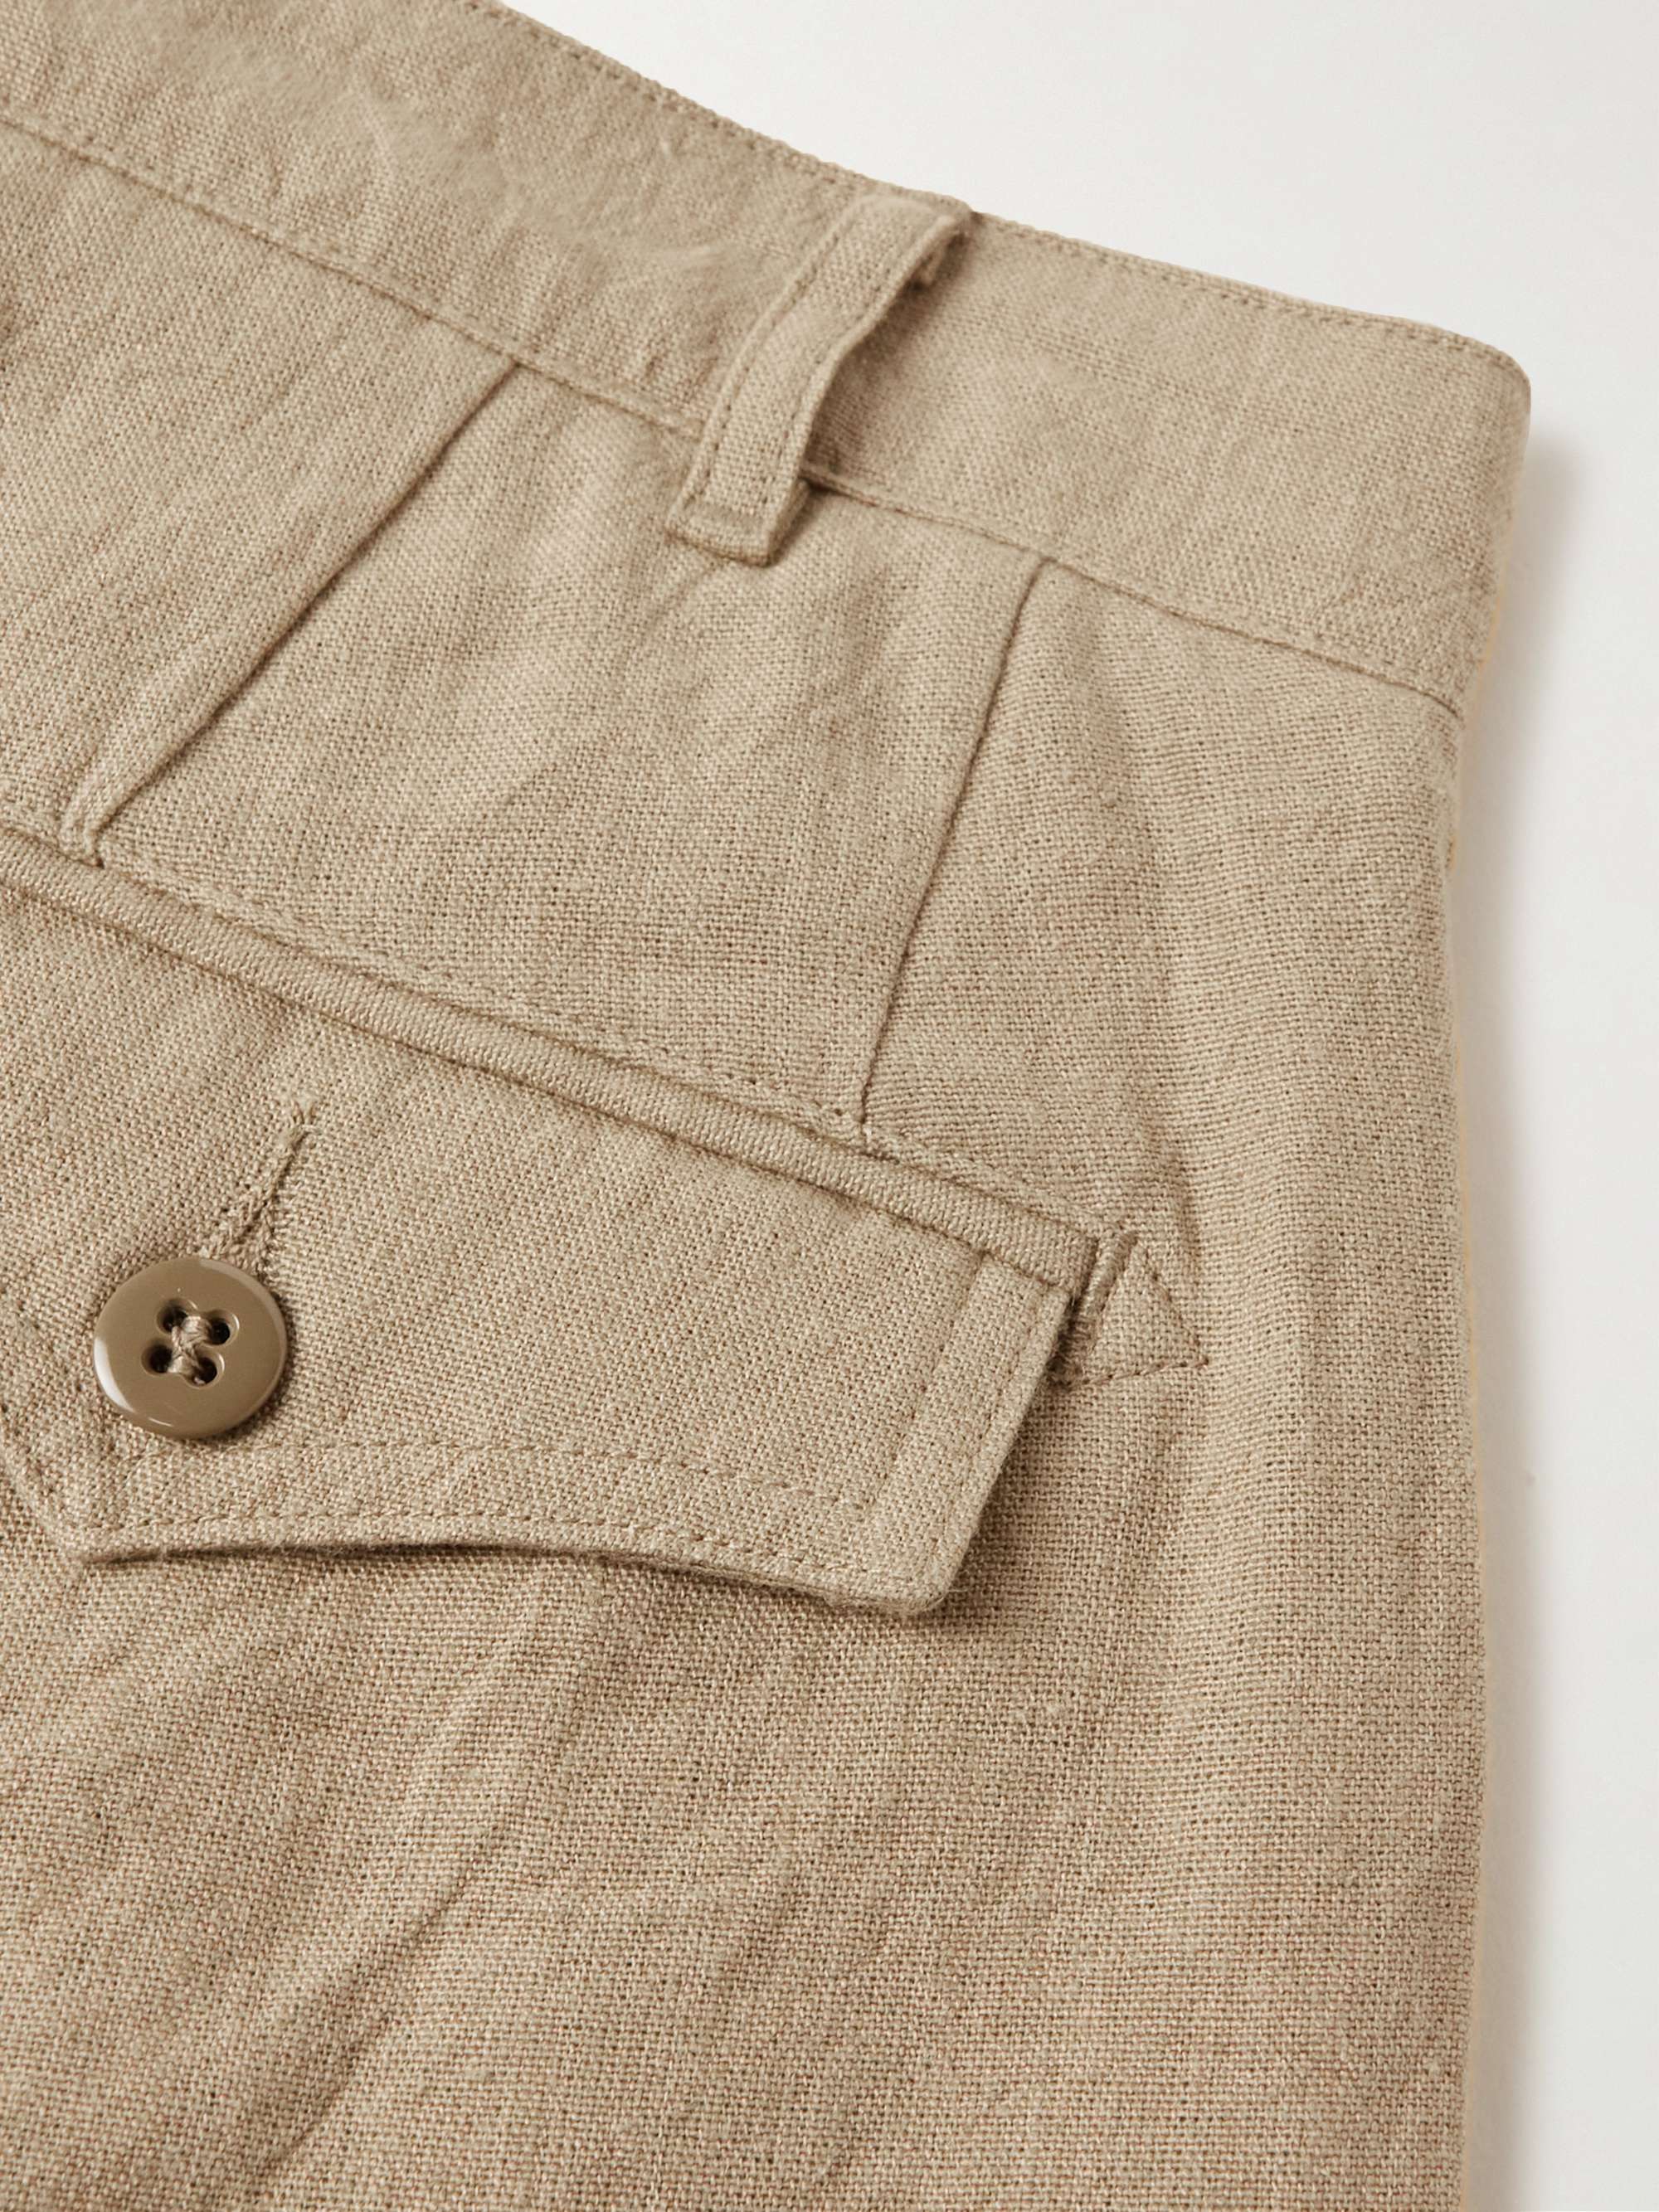 MONITALY Riding Tapered Pleated Linen and Cotton-Blend Trousers